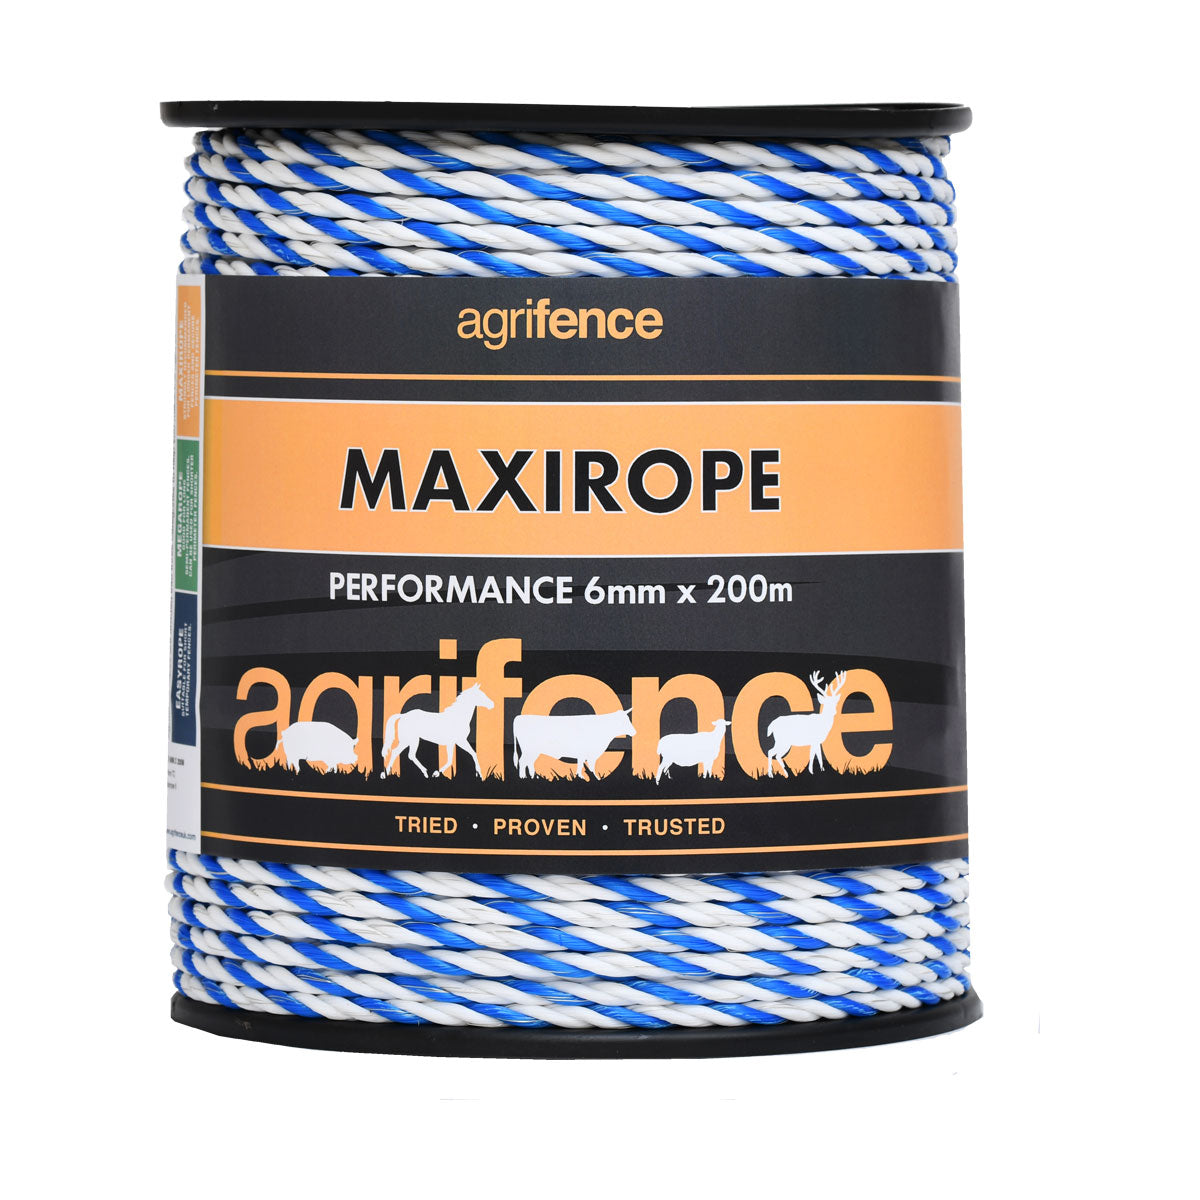 Agrifence Maxirope Premium Fence Rope (H4768) Electric Fencing Tape Barnstaple Equestrian Supplies